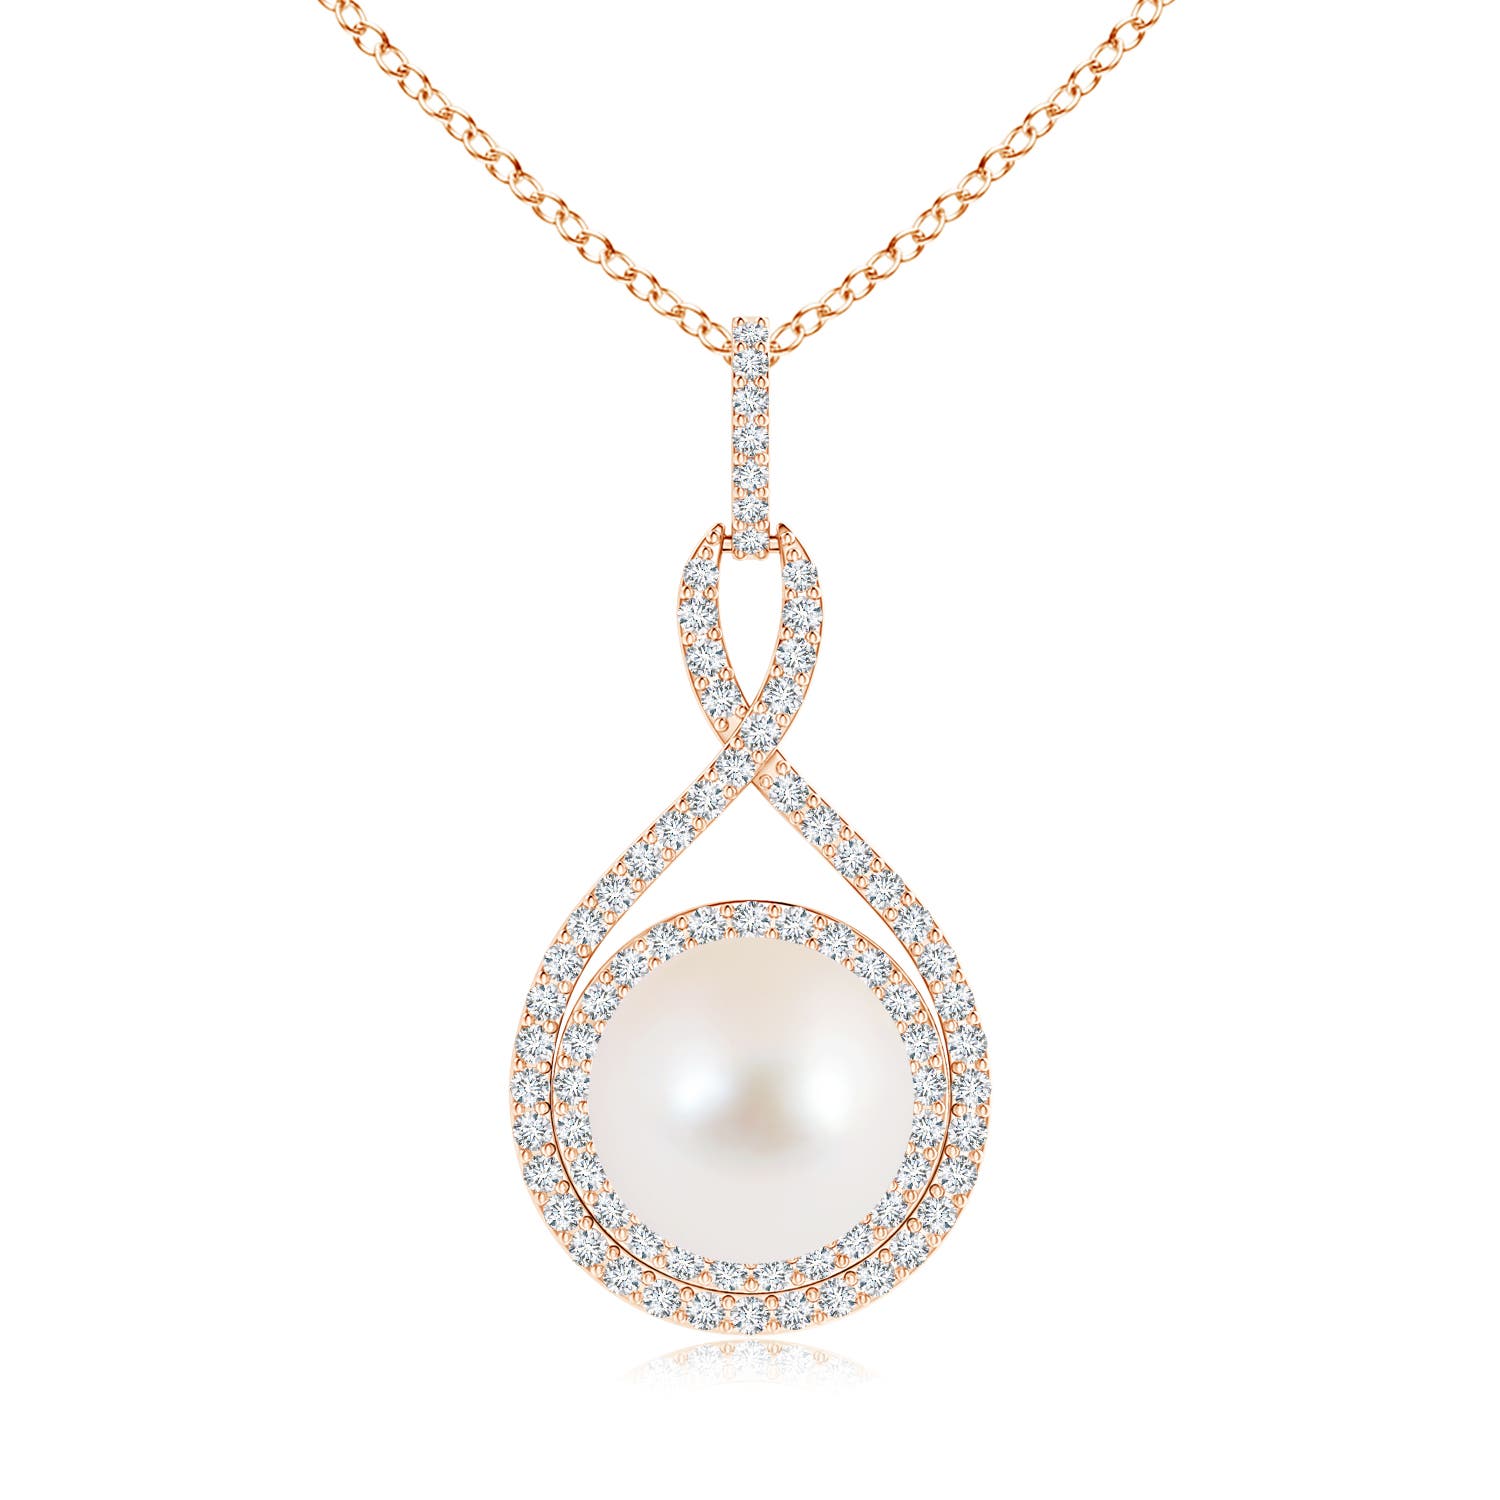 AAA - Freshwater Cultured Pearl / 7.79 CT / 14 KT Rose Gold